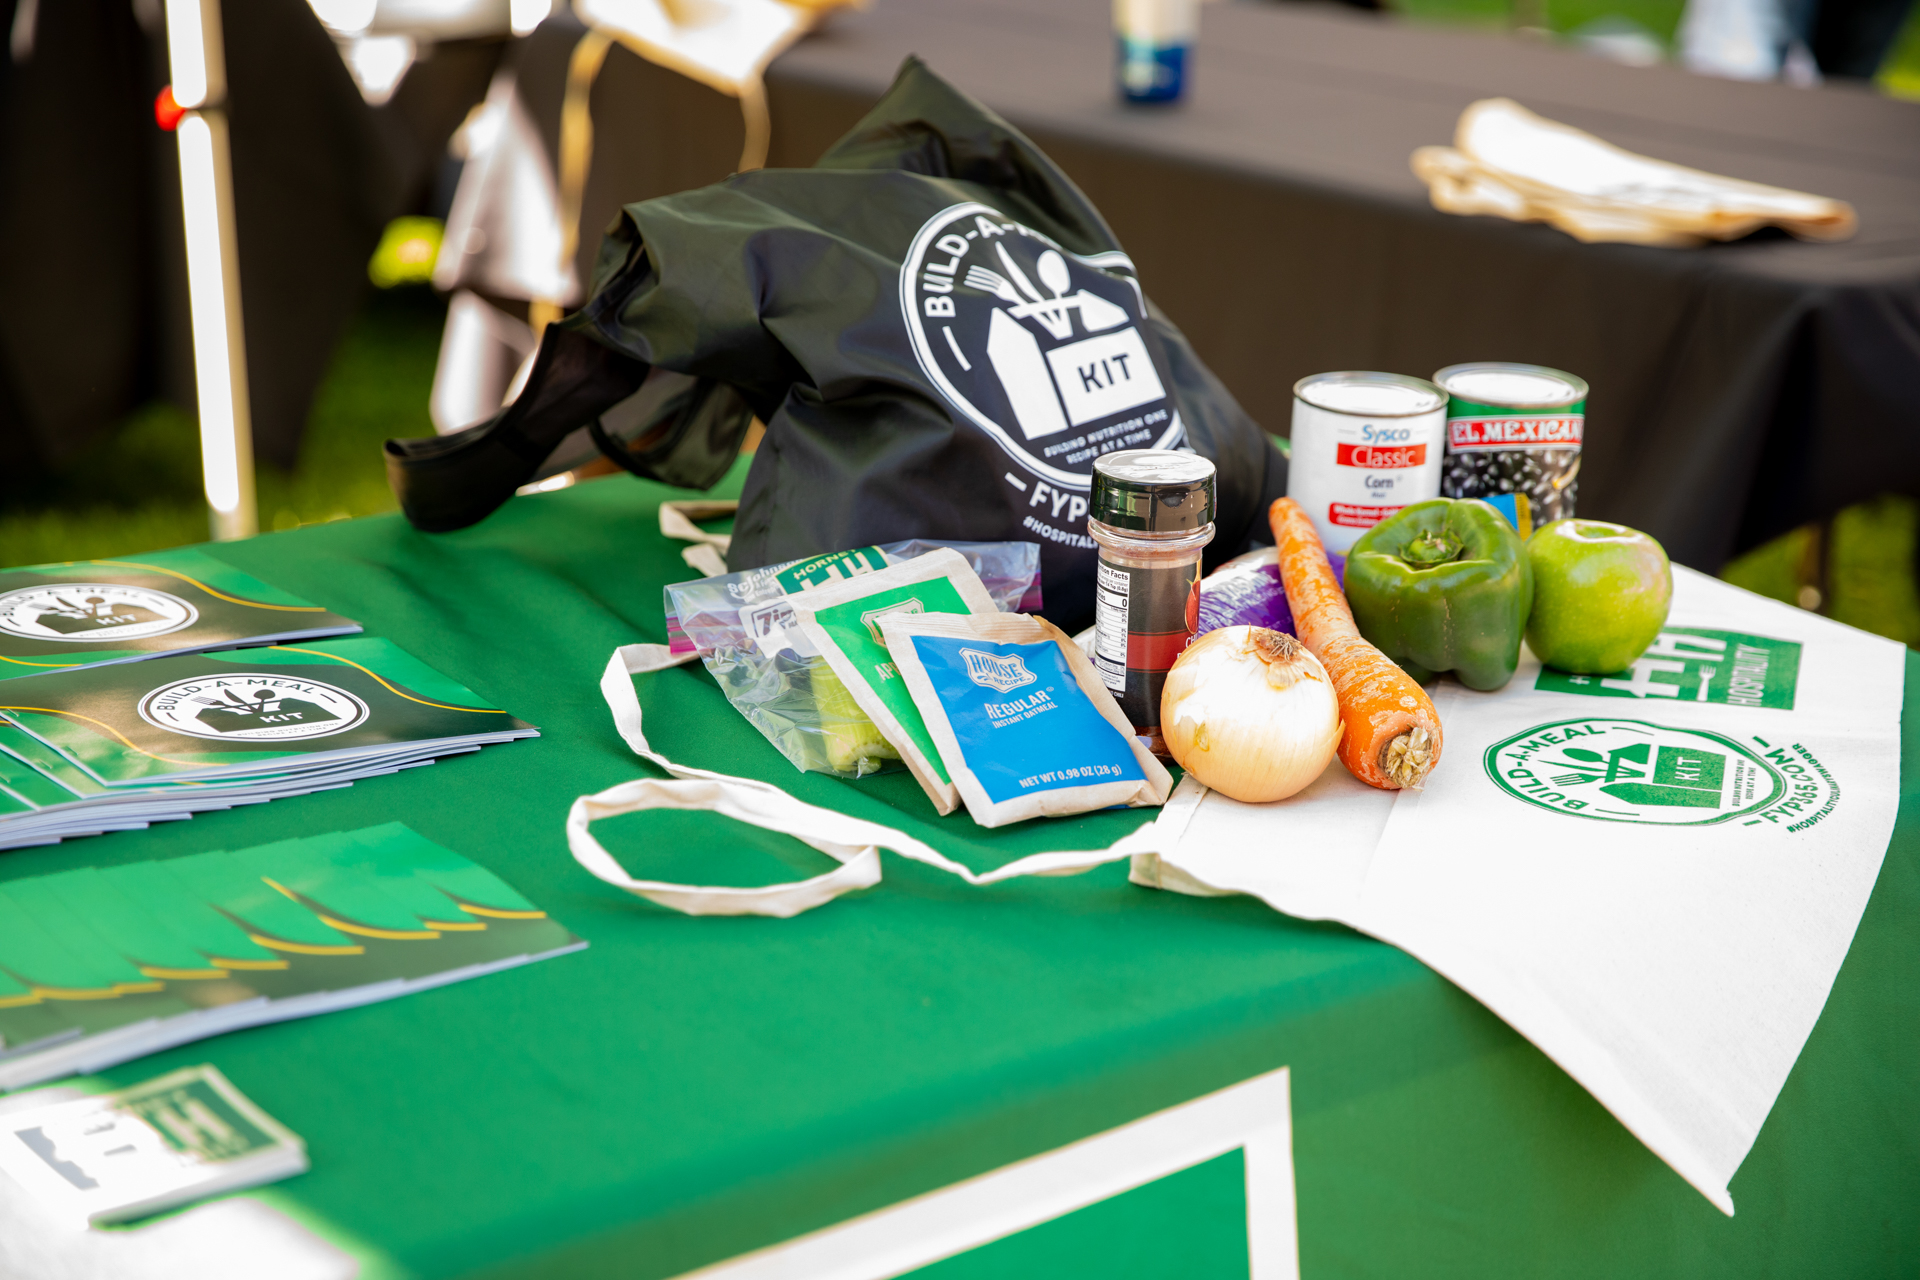 A bag, food items, and brochures sit on a table with a green tablecloth.